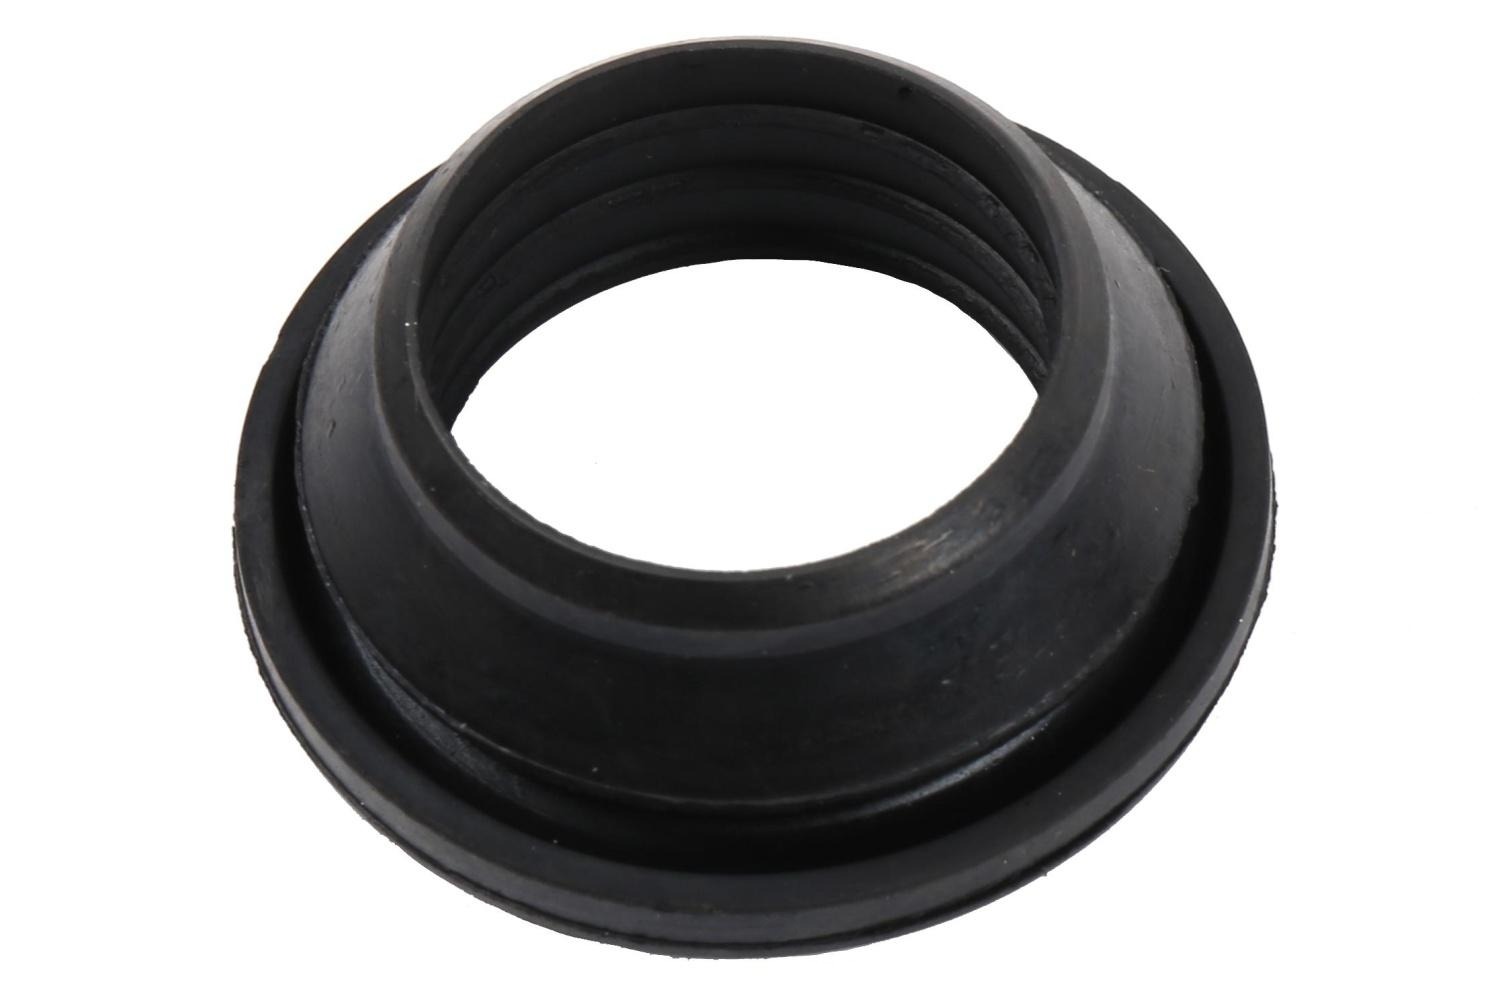 GM GENUINE PARTS - Washer Fluid Reservoir Mounting Grommet - GMP 09114703